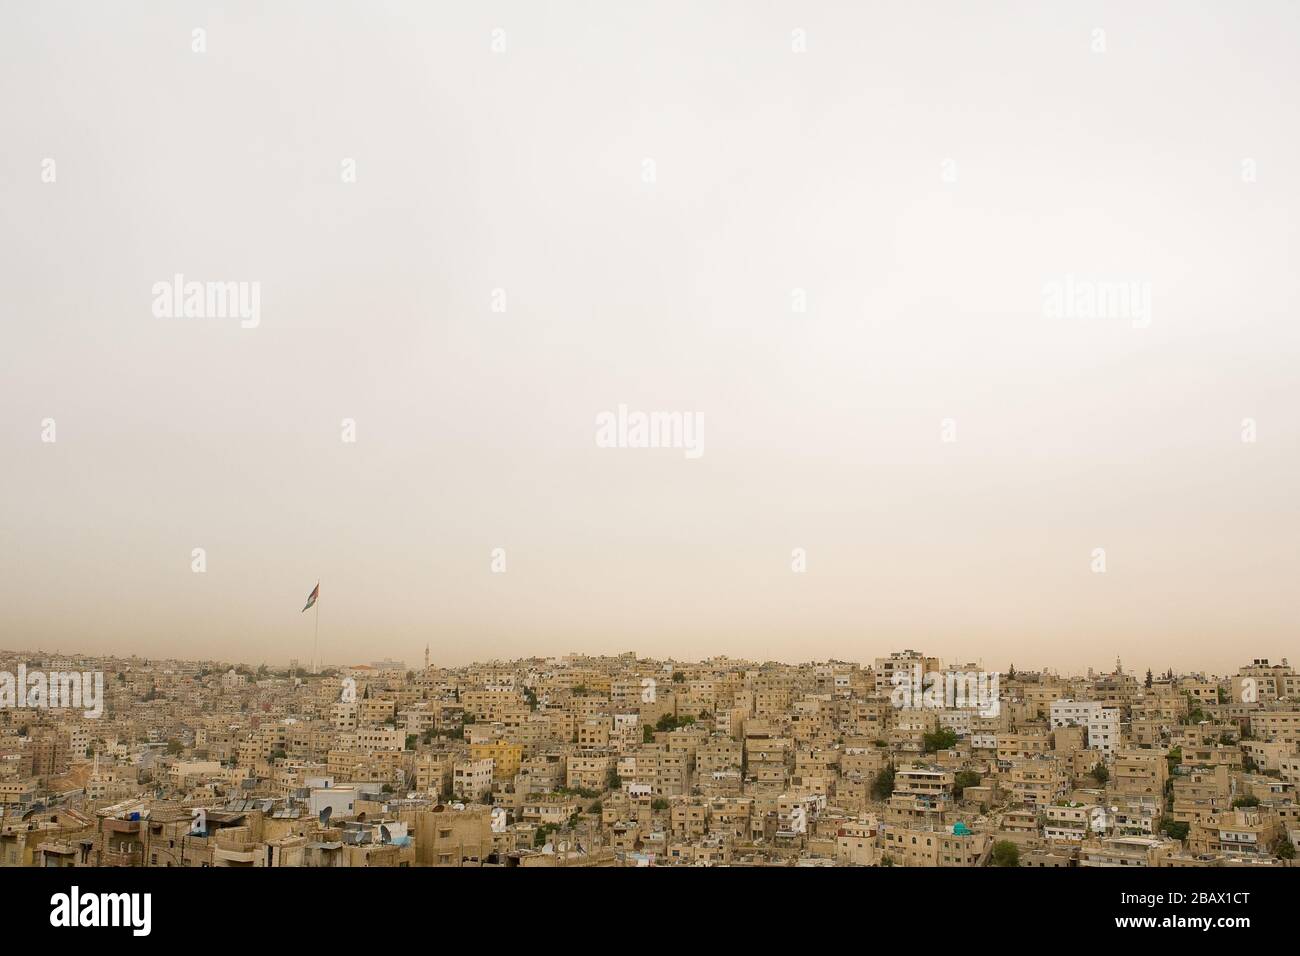 The densely populated area of the old city of Amman, Jordan, and the Raghadan Flagpole, one of the tallest free-standing flagpoles in the world. Stock Photo